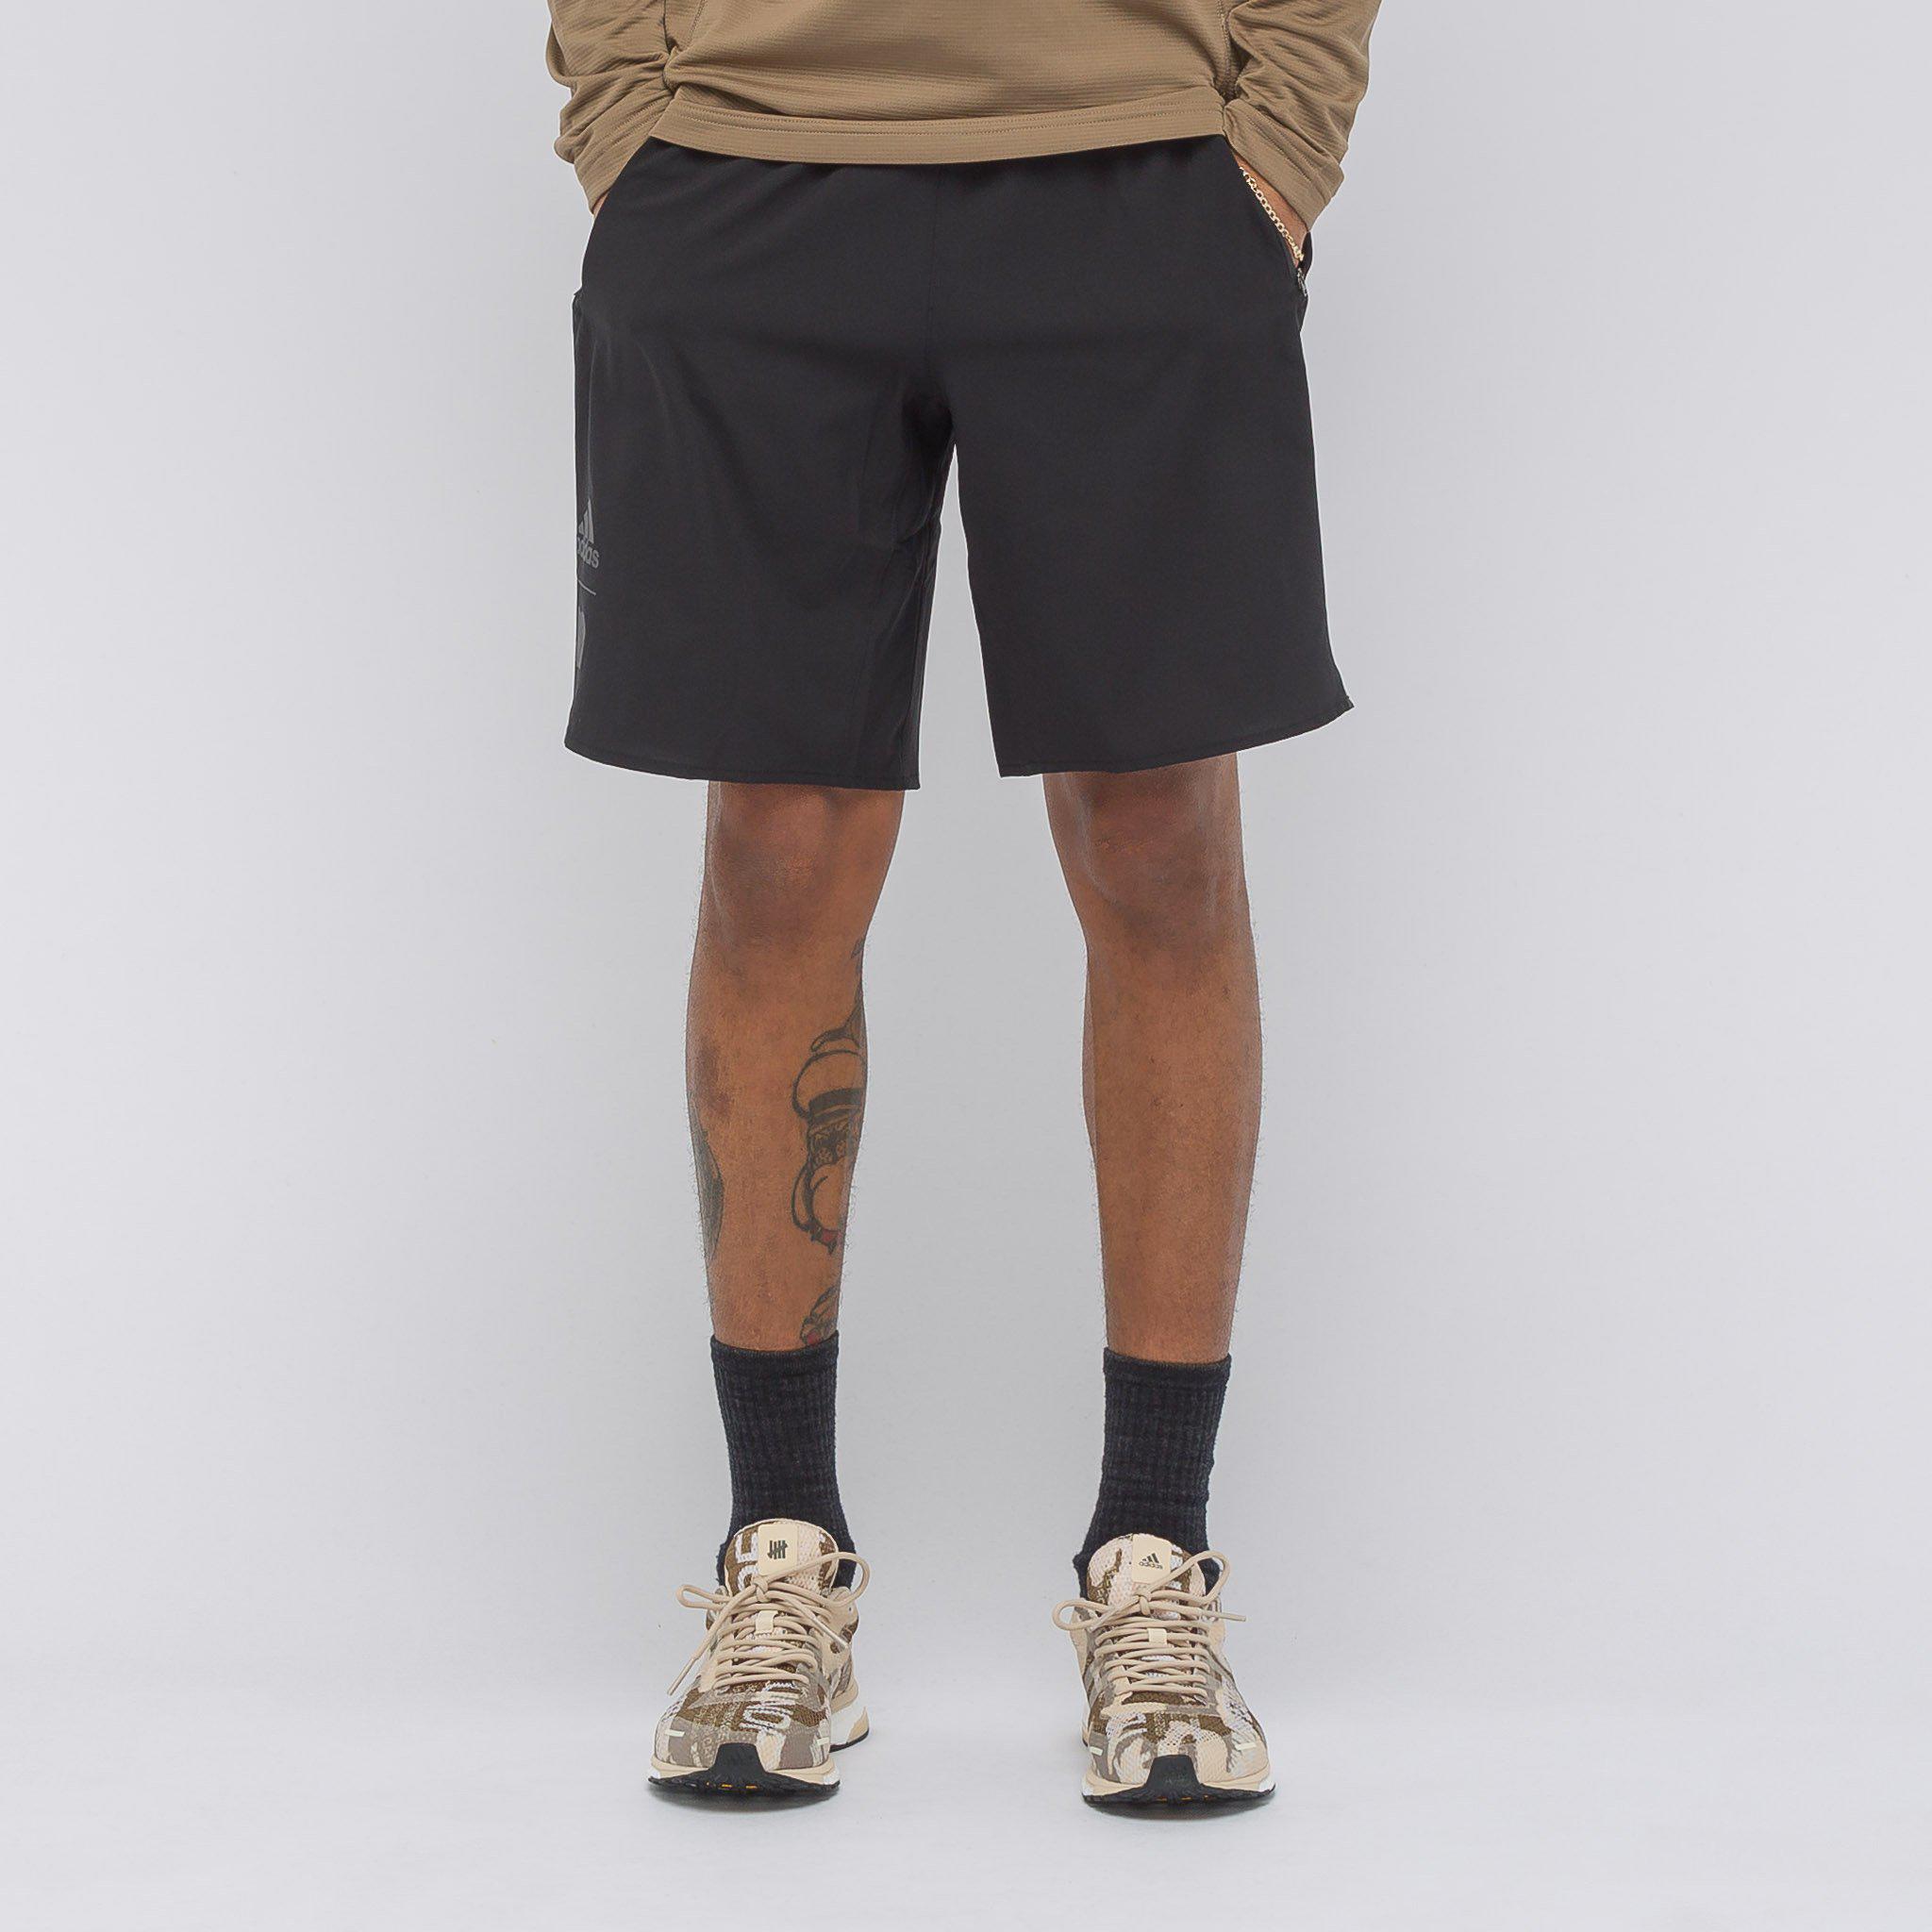 Adidas Undefeated Shorts Outlet, SAVE 48% - aveclumiere.com